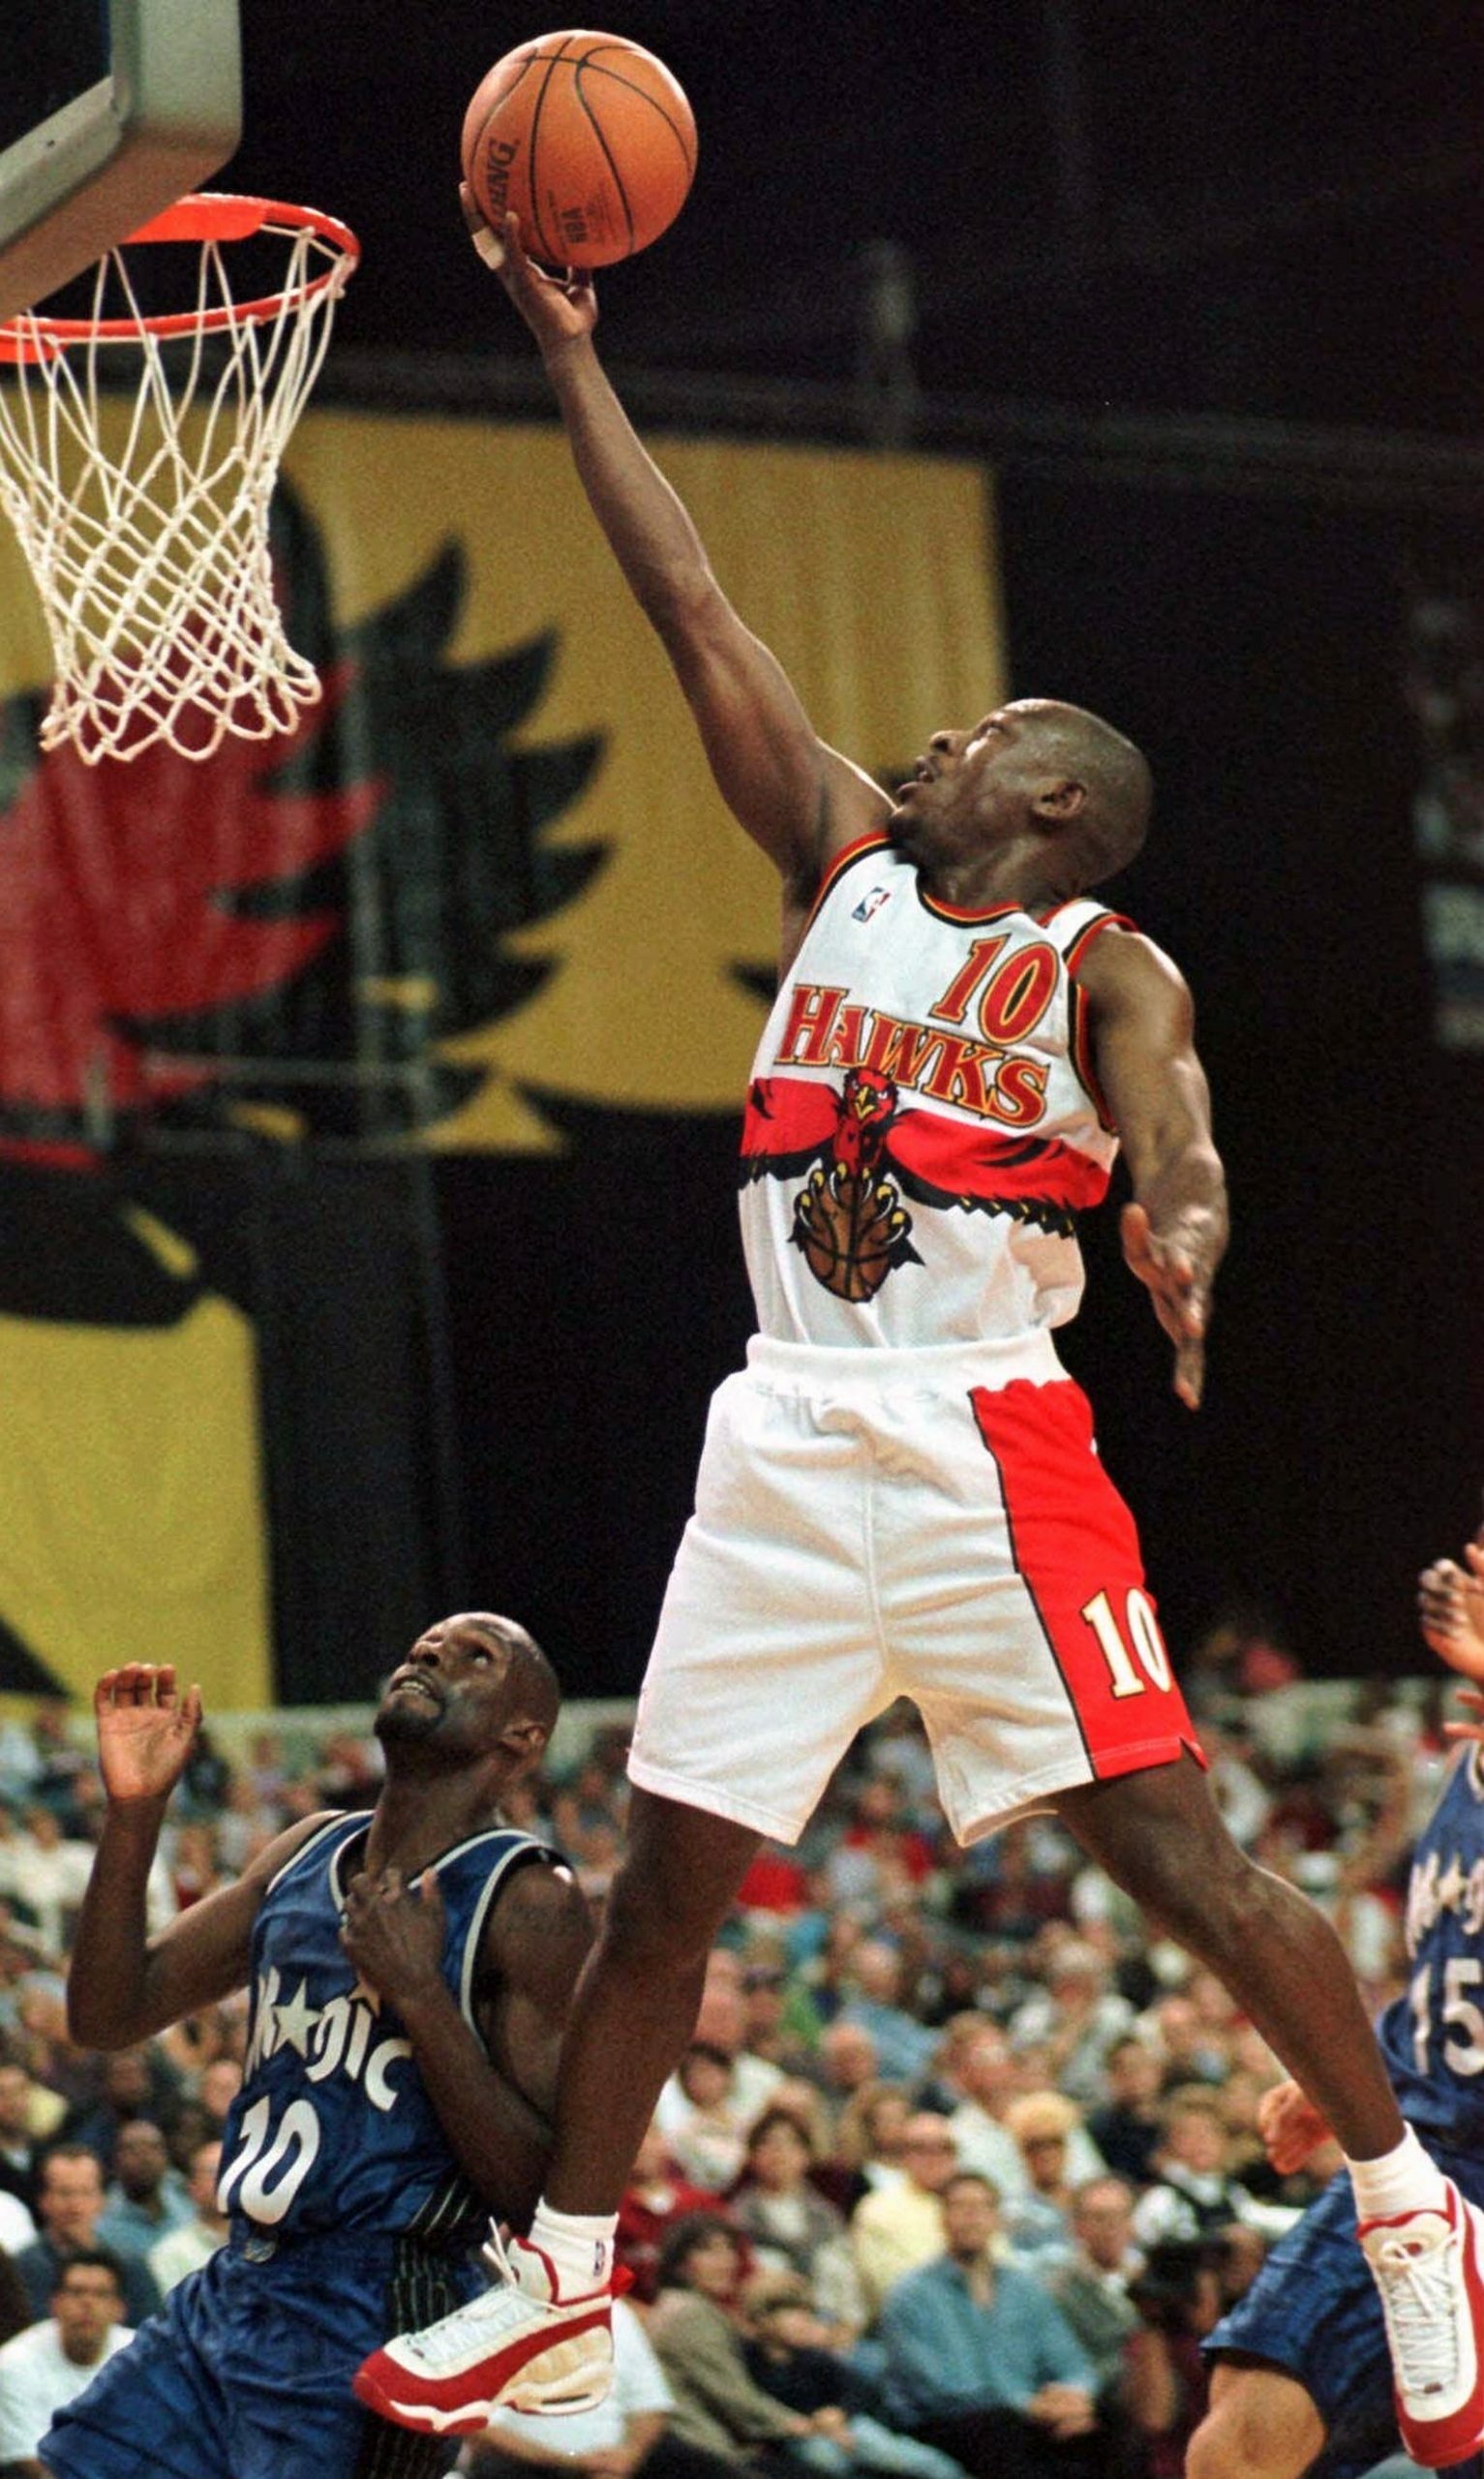 The 6'0 PG that blocked MJ's shot Mookie Blaylock is one of the best , nba